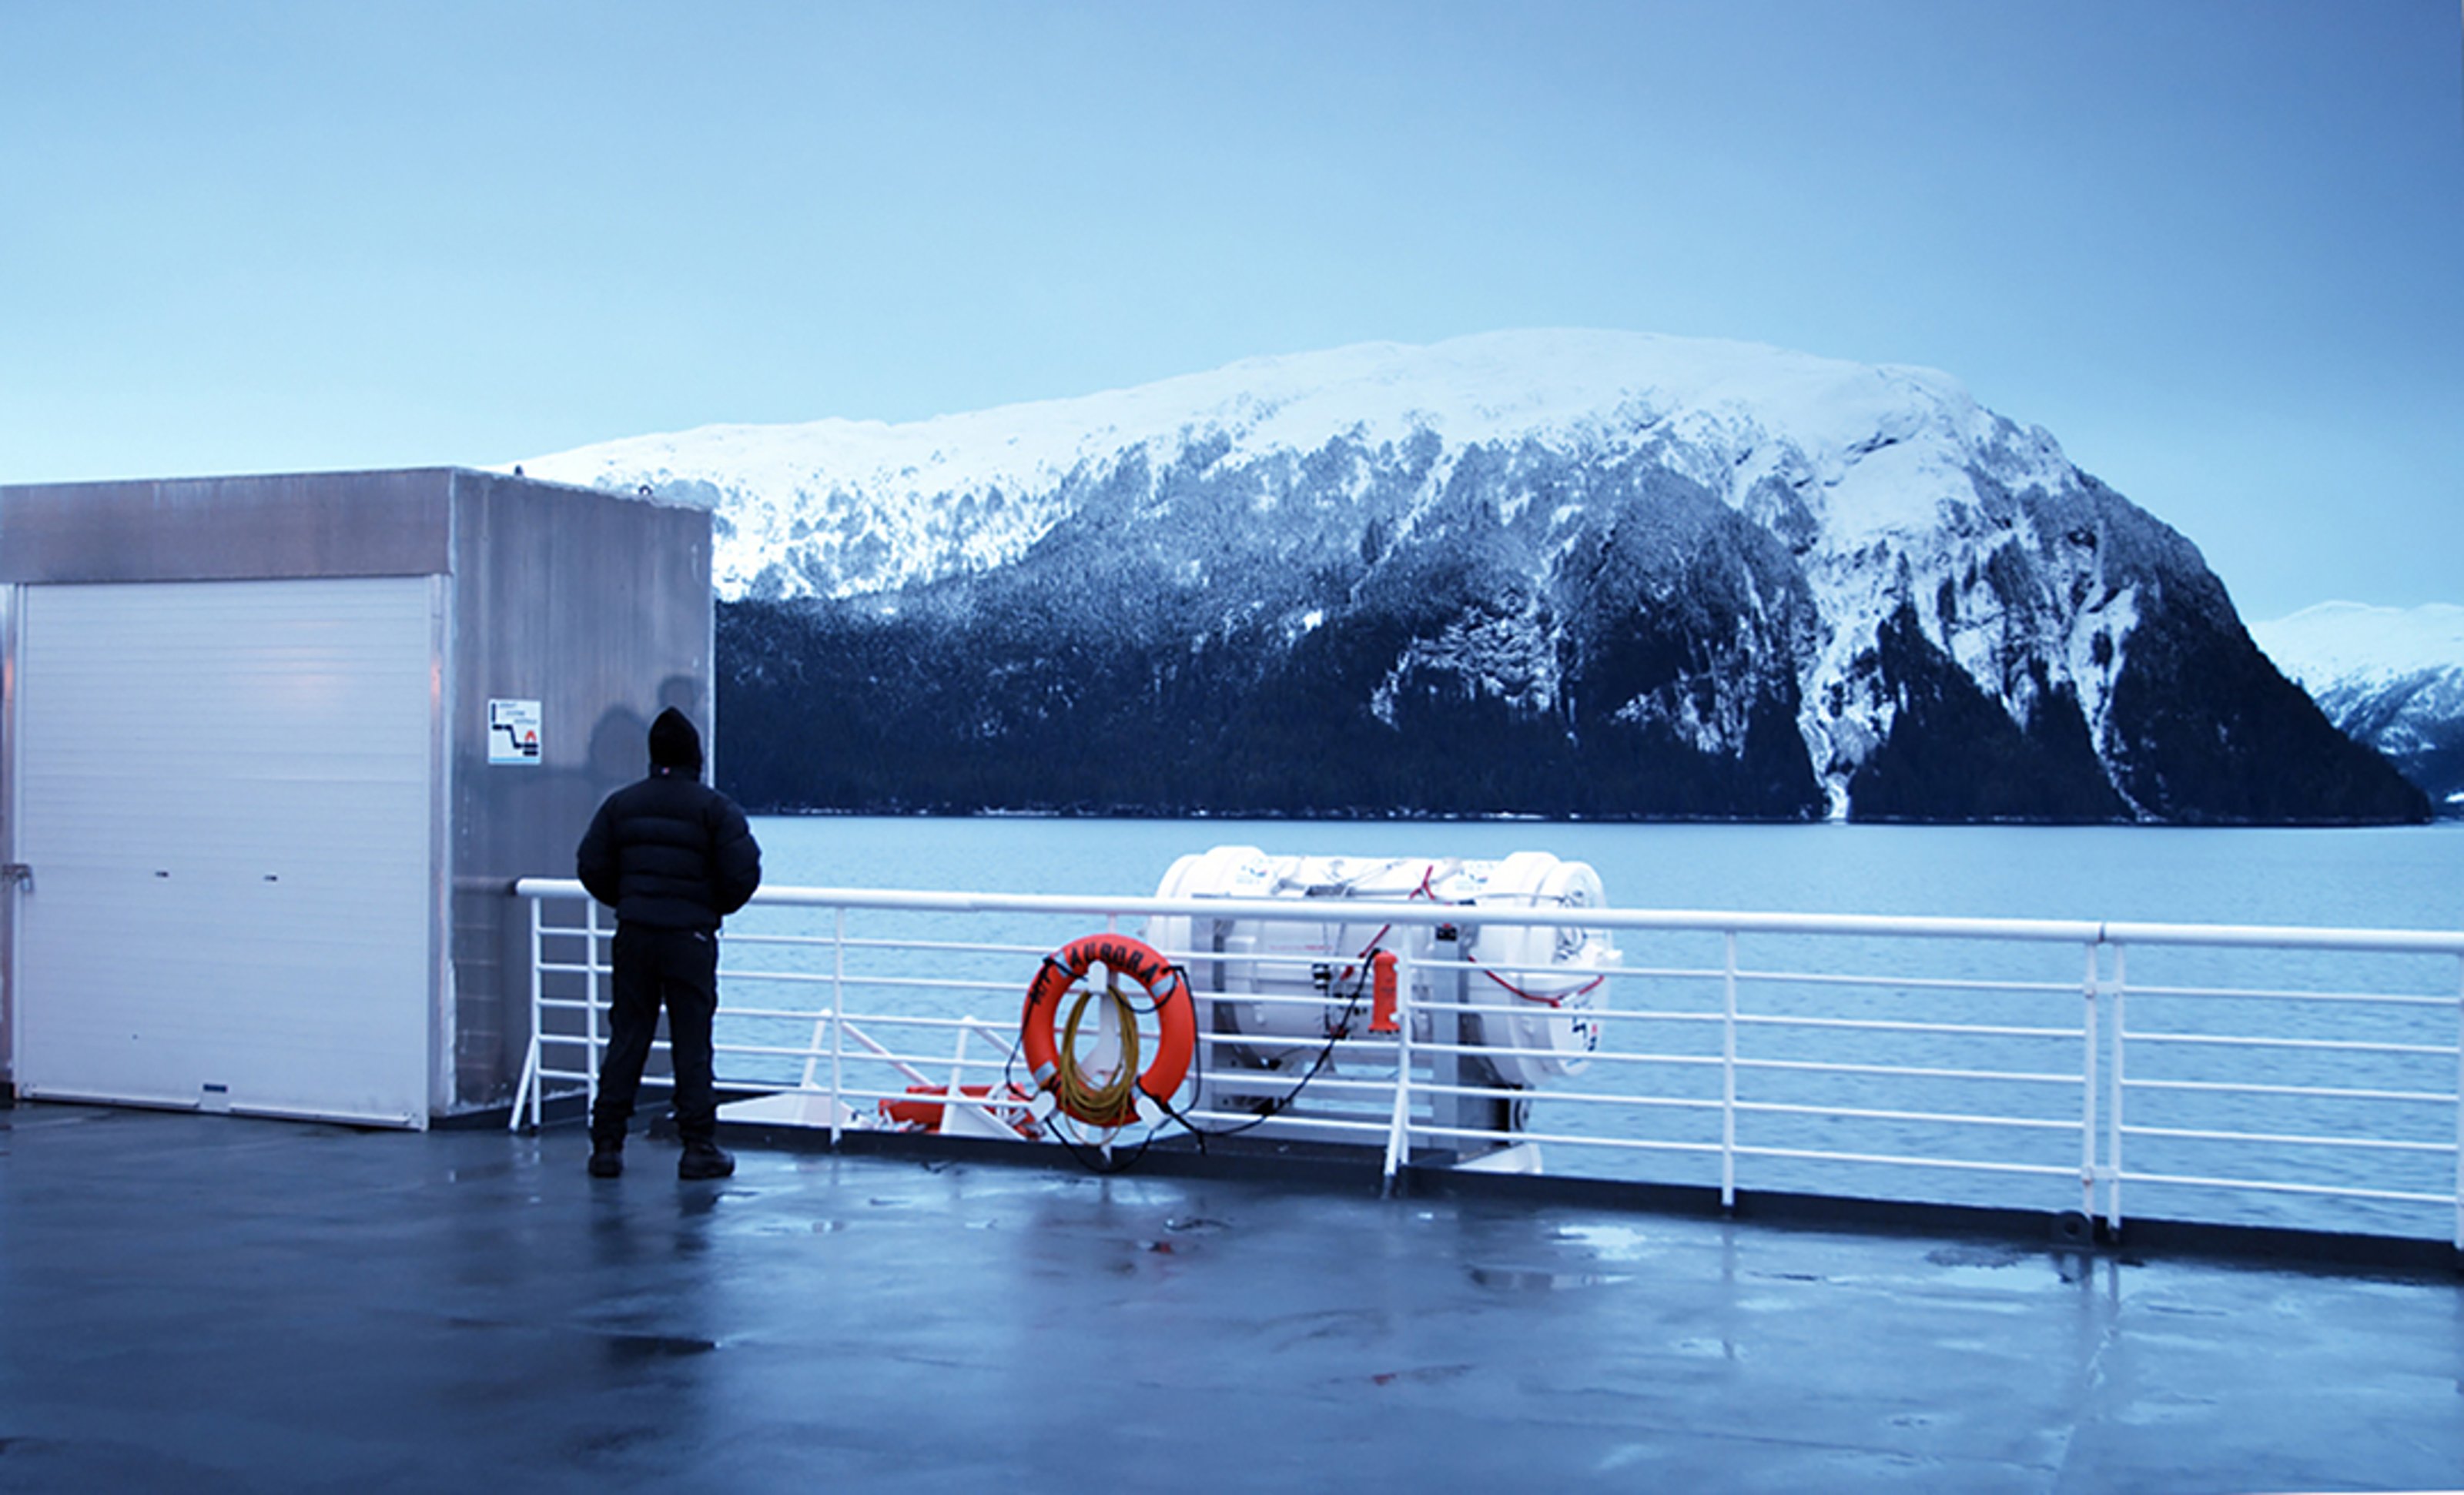 A man with his back turned to the camera, standing on board of a ship. He is gazing towards a snowy mountain.